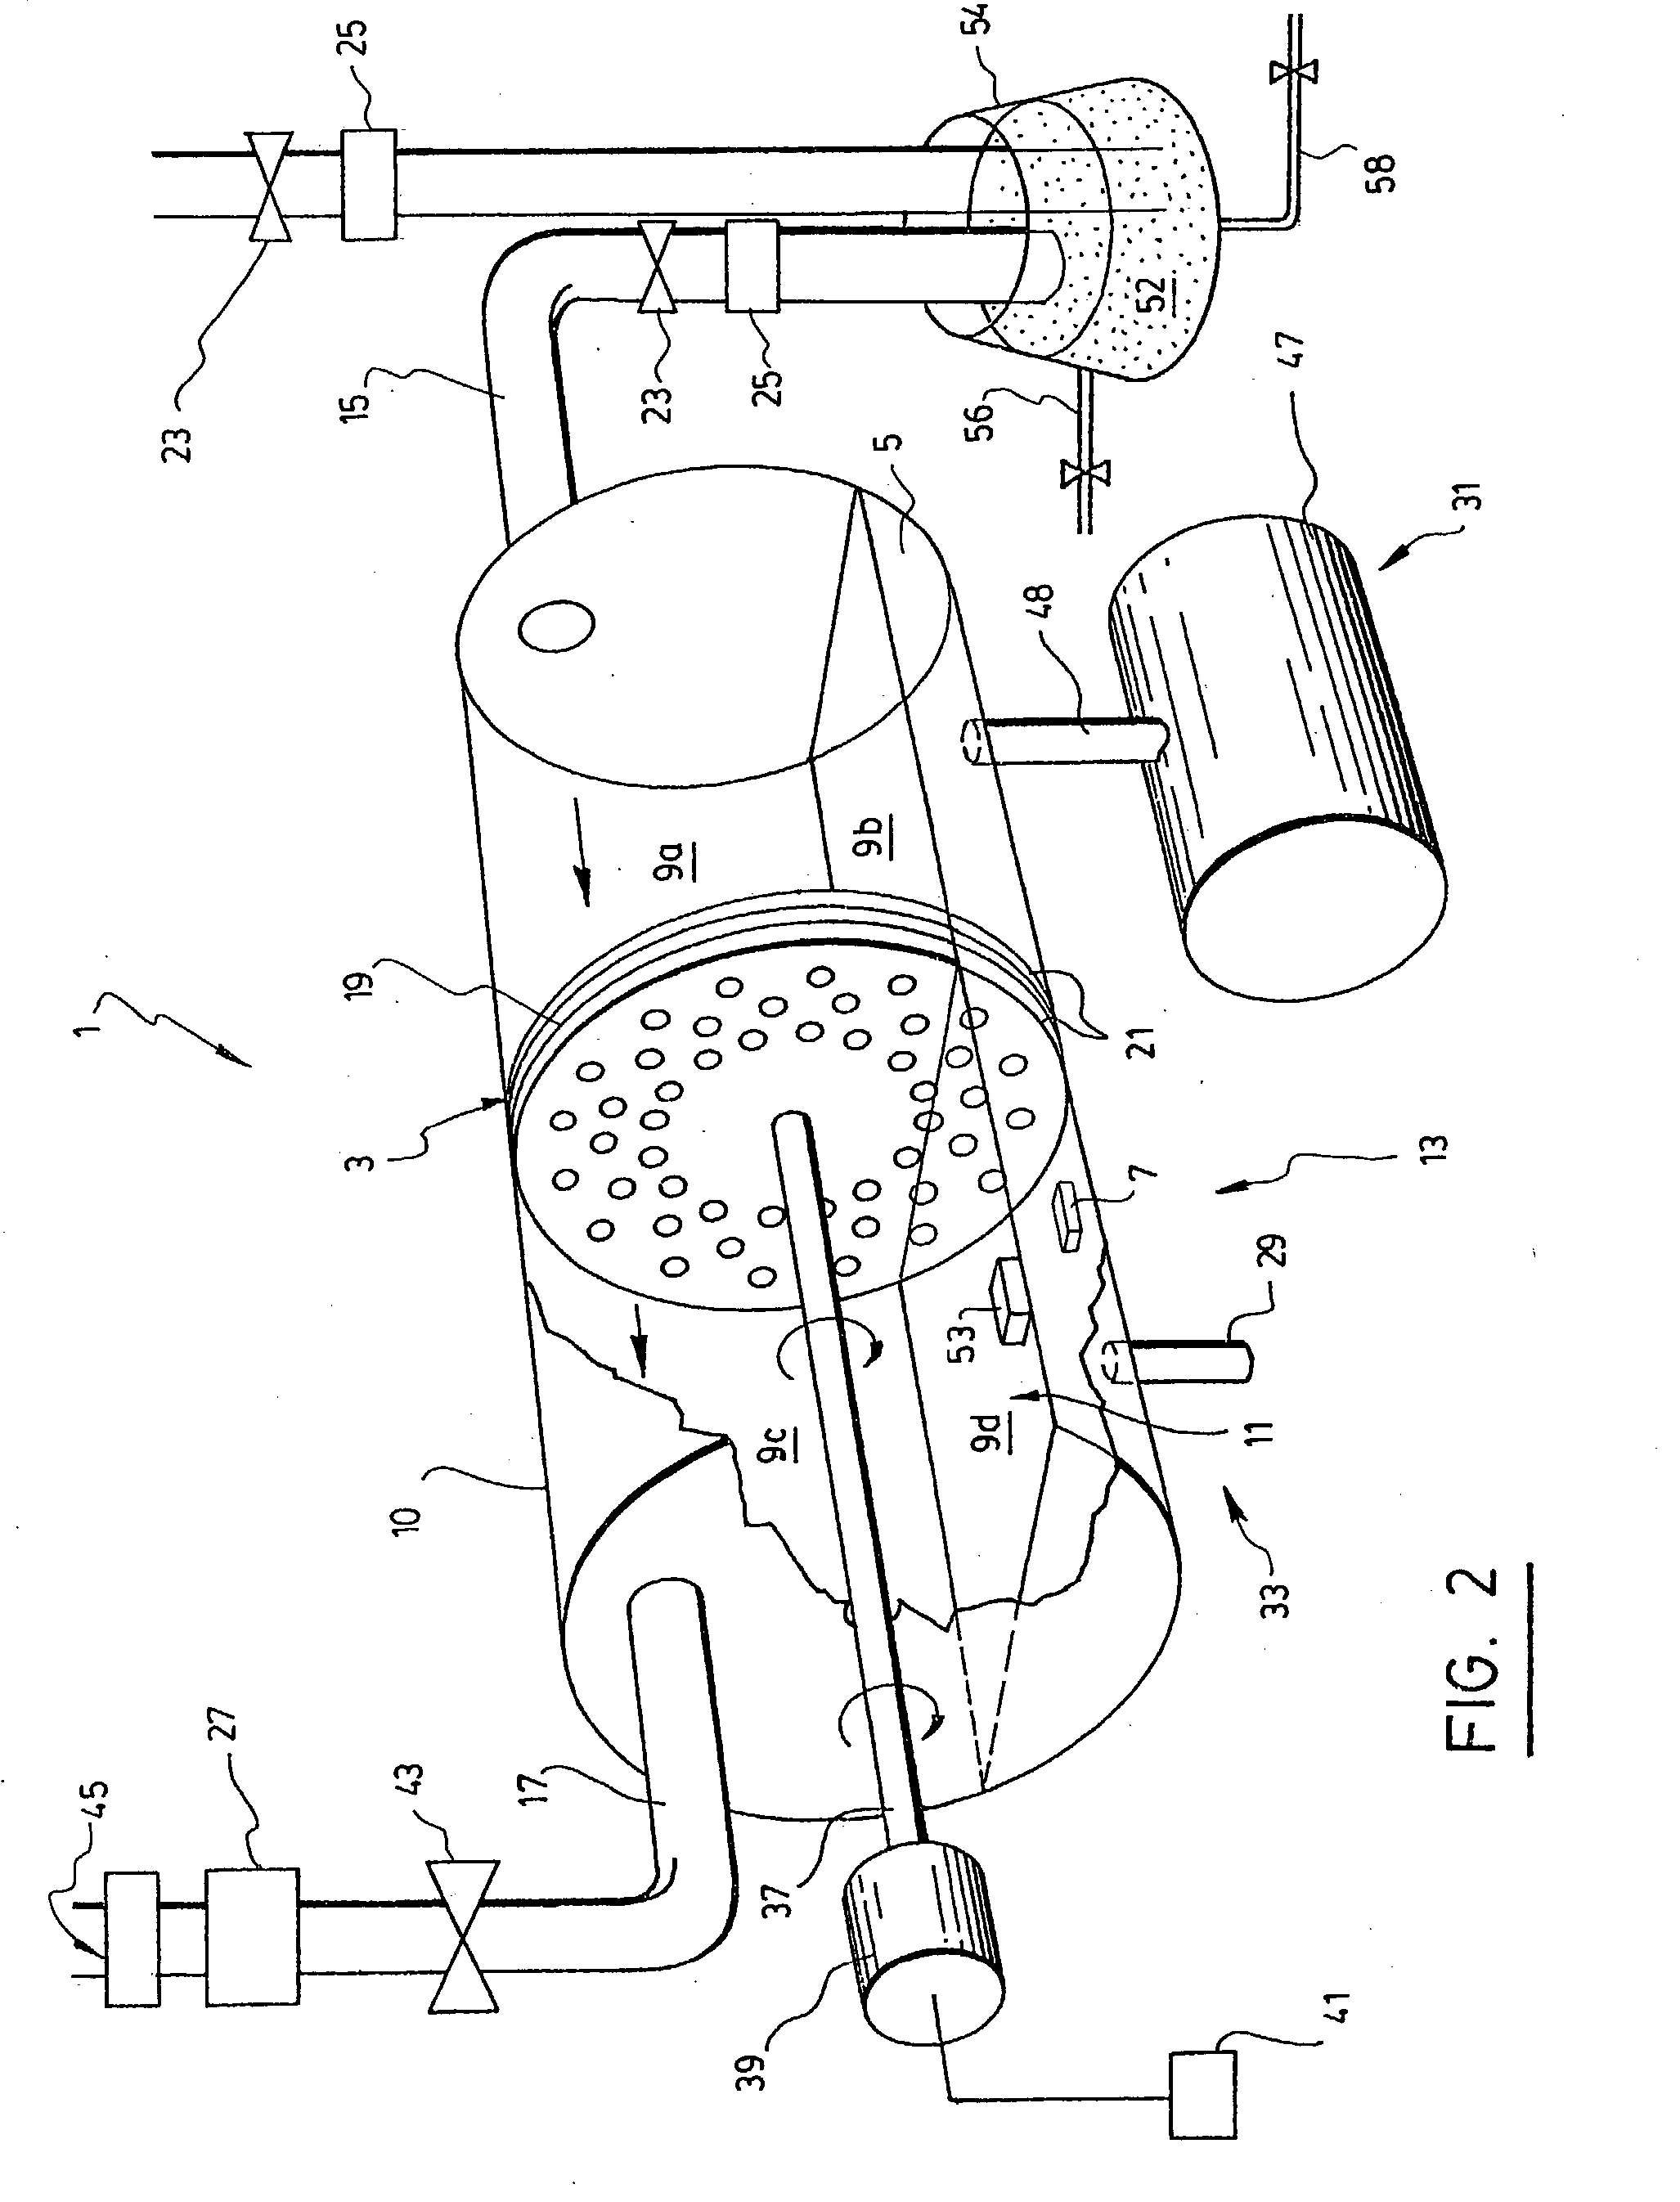 Method, device and system for detecting the presence of microorganisms